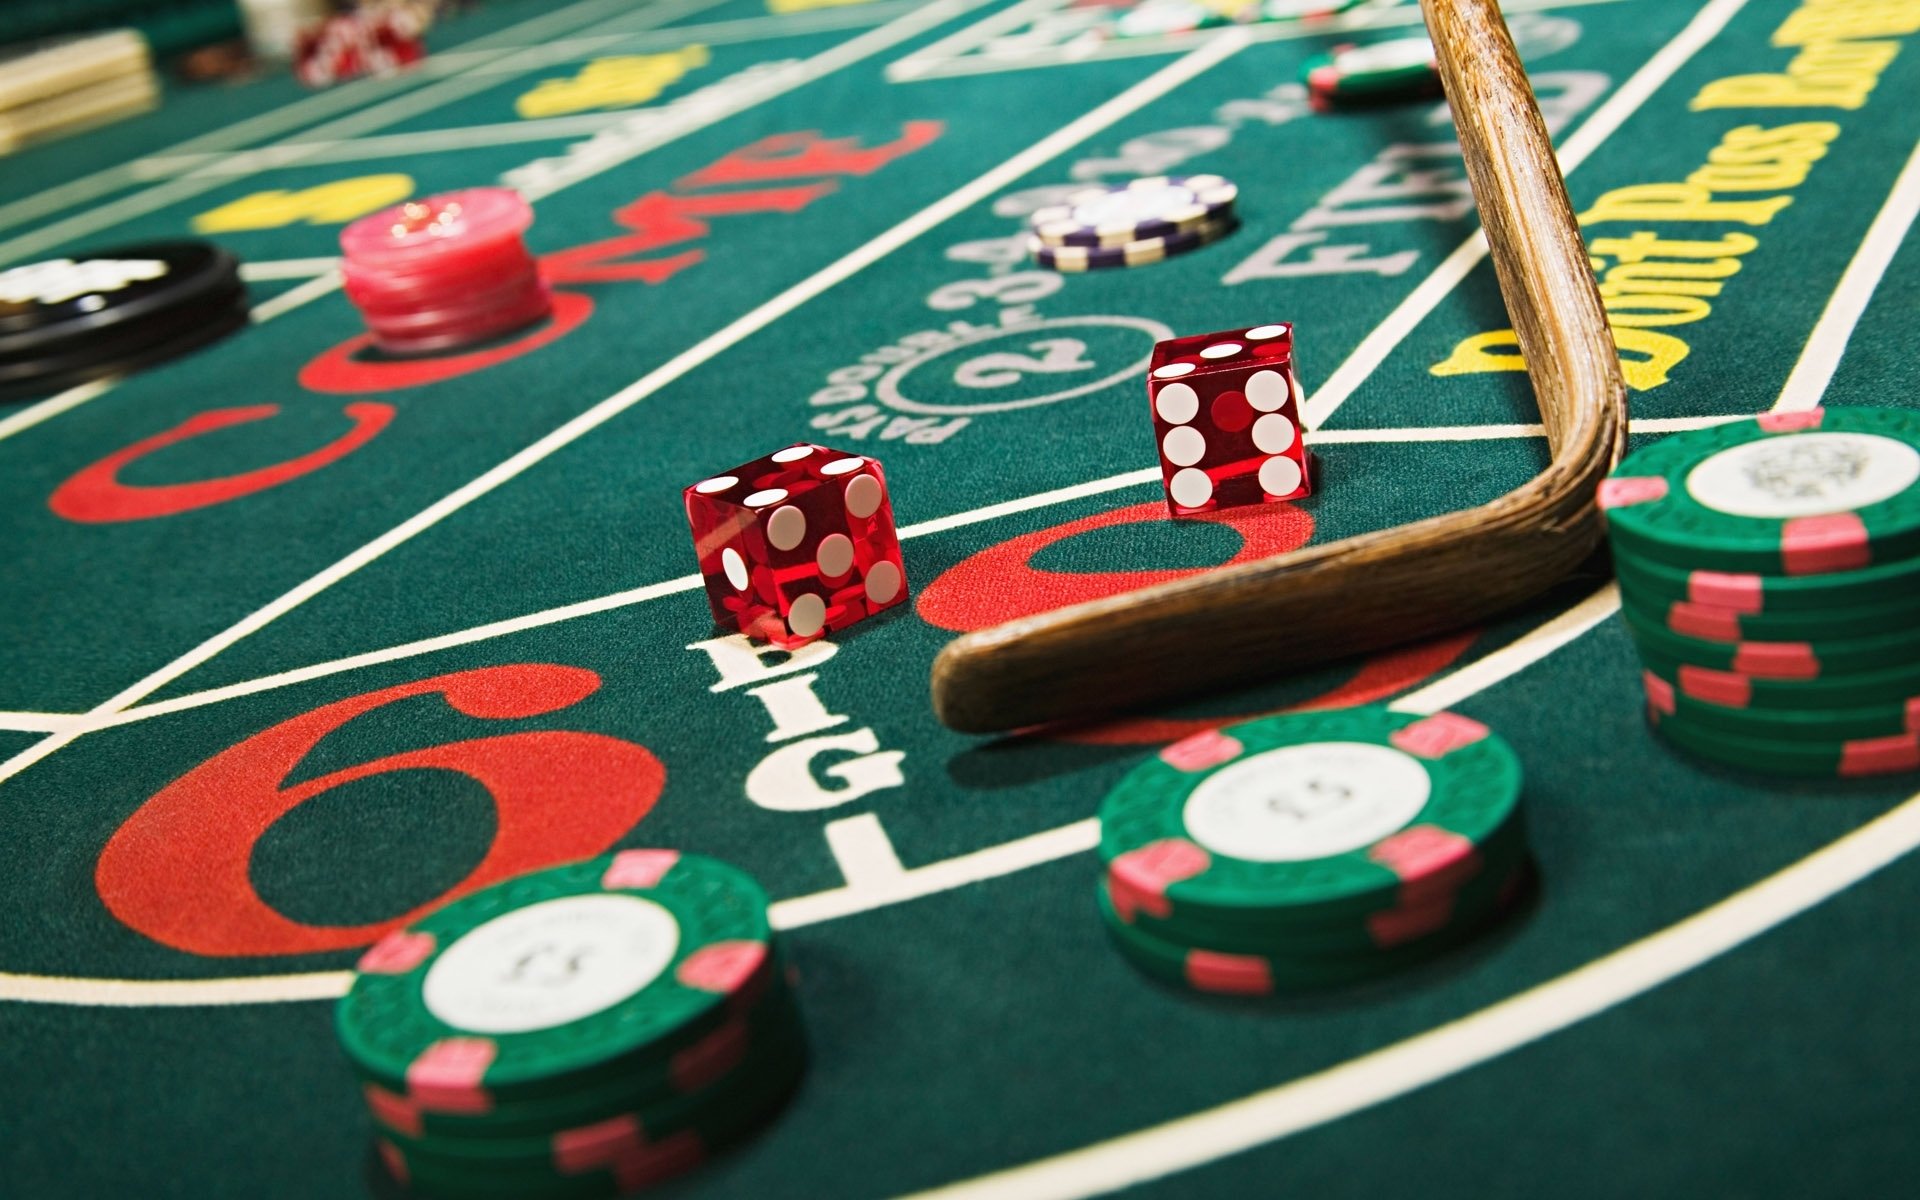 Tips About ONLINE SLOT GAMBLING SITE You Can't Afford To Miss